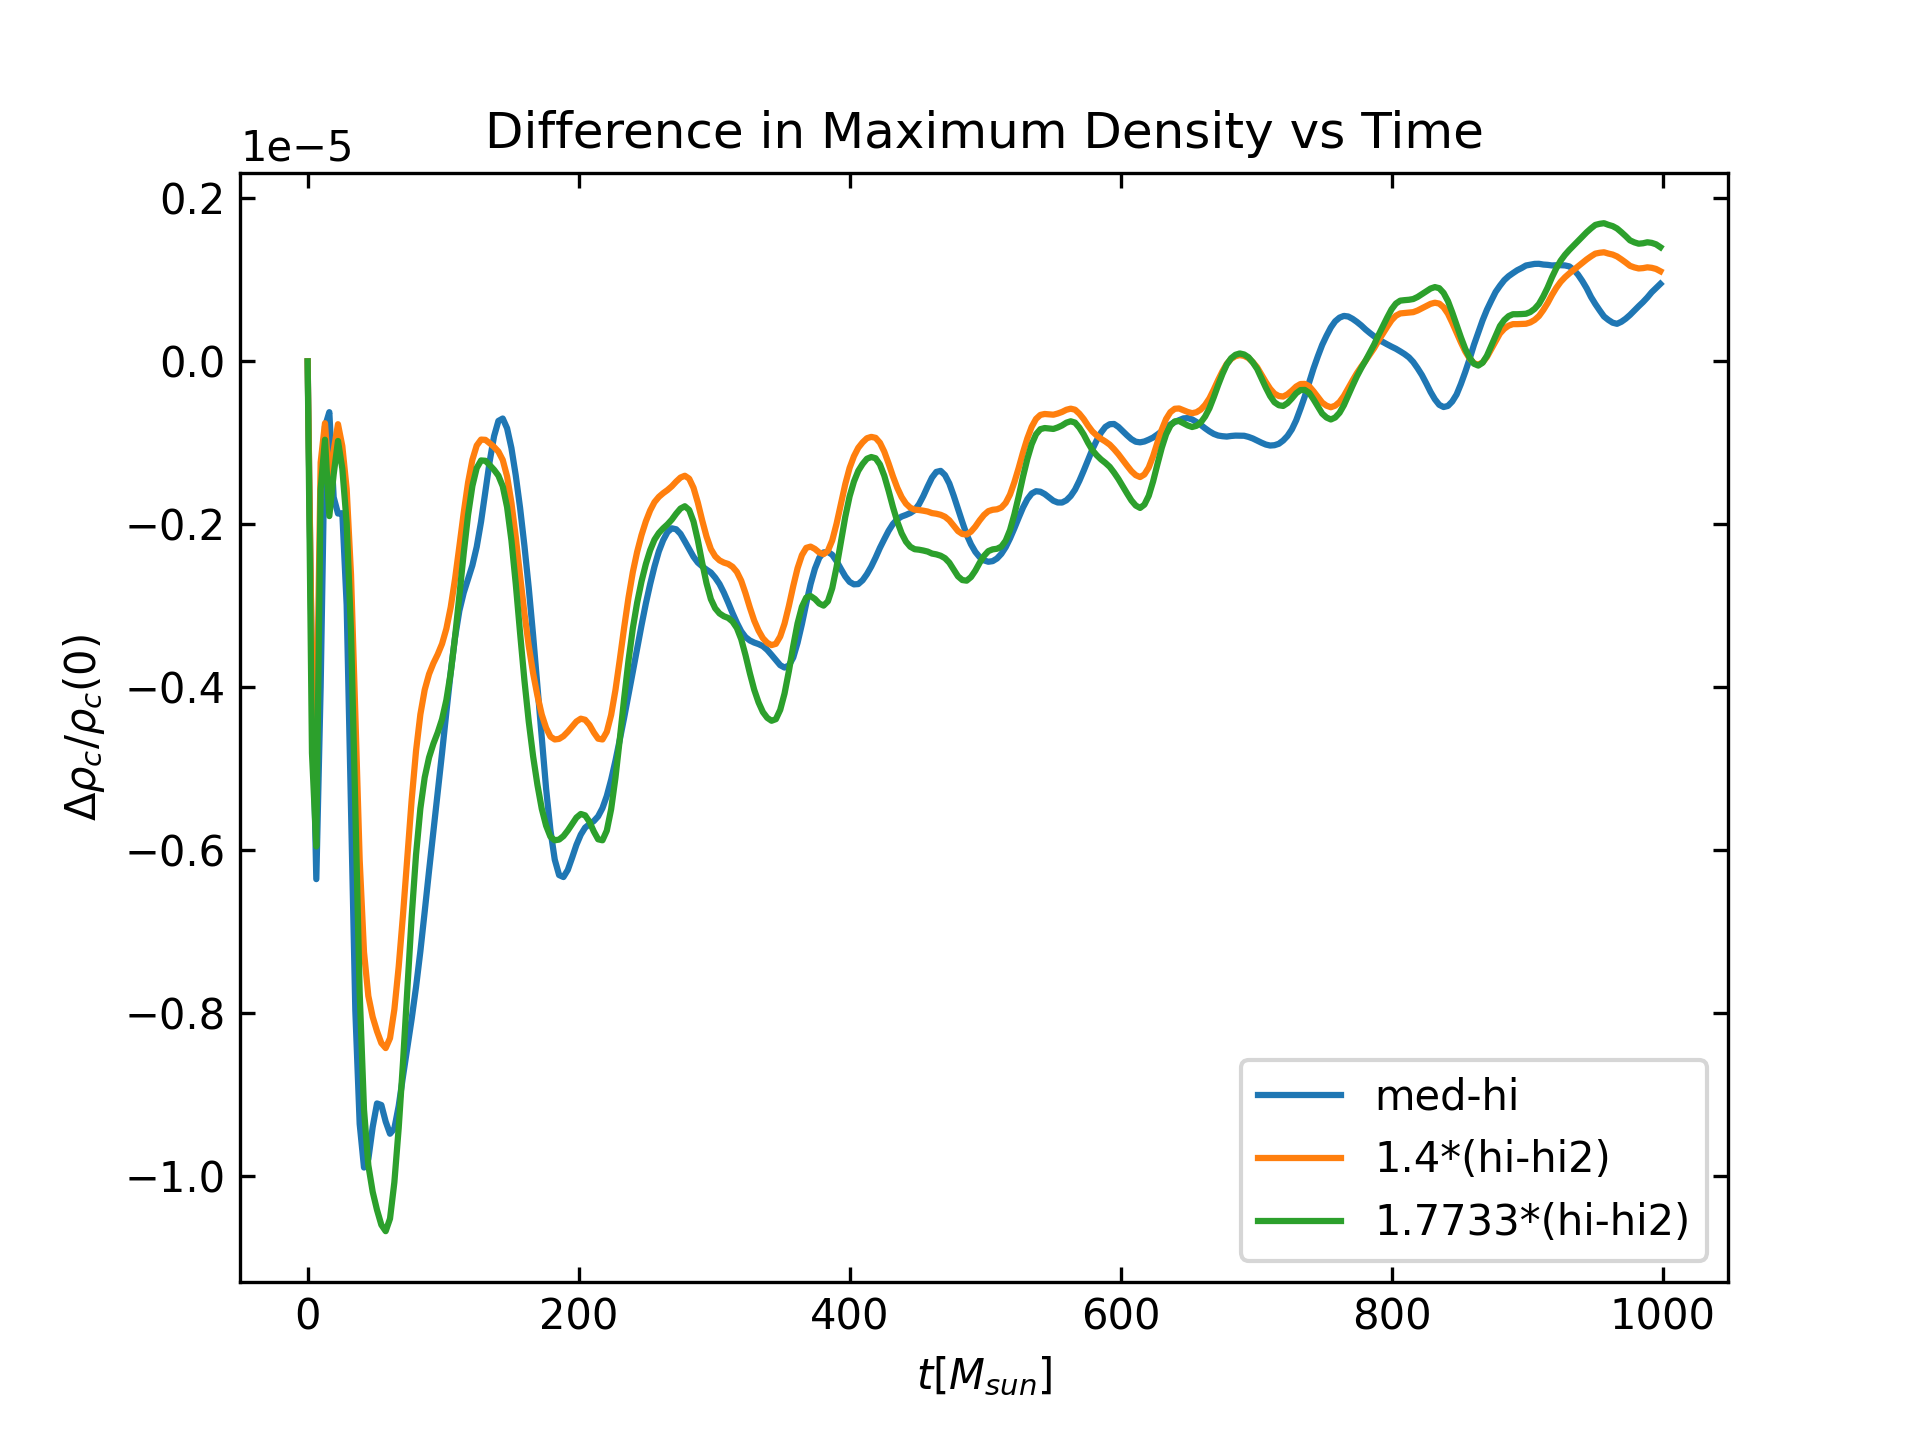 Difference in Maximum density over time